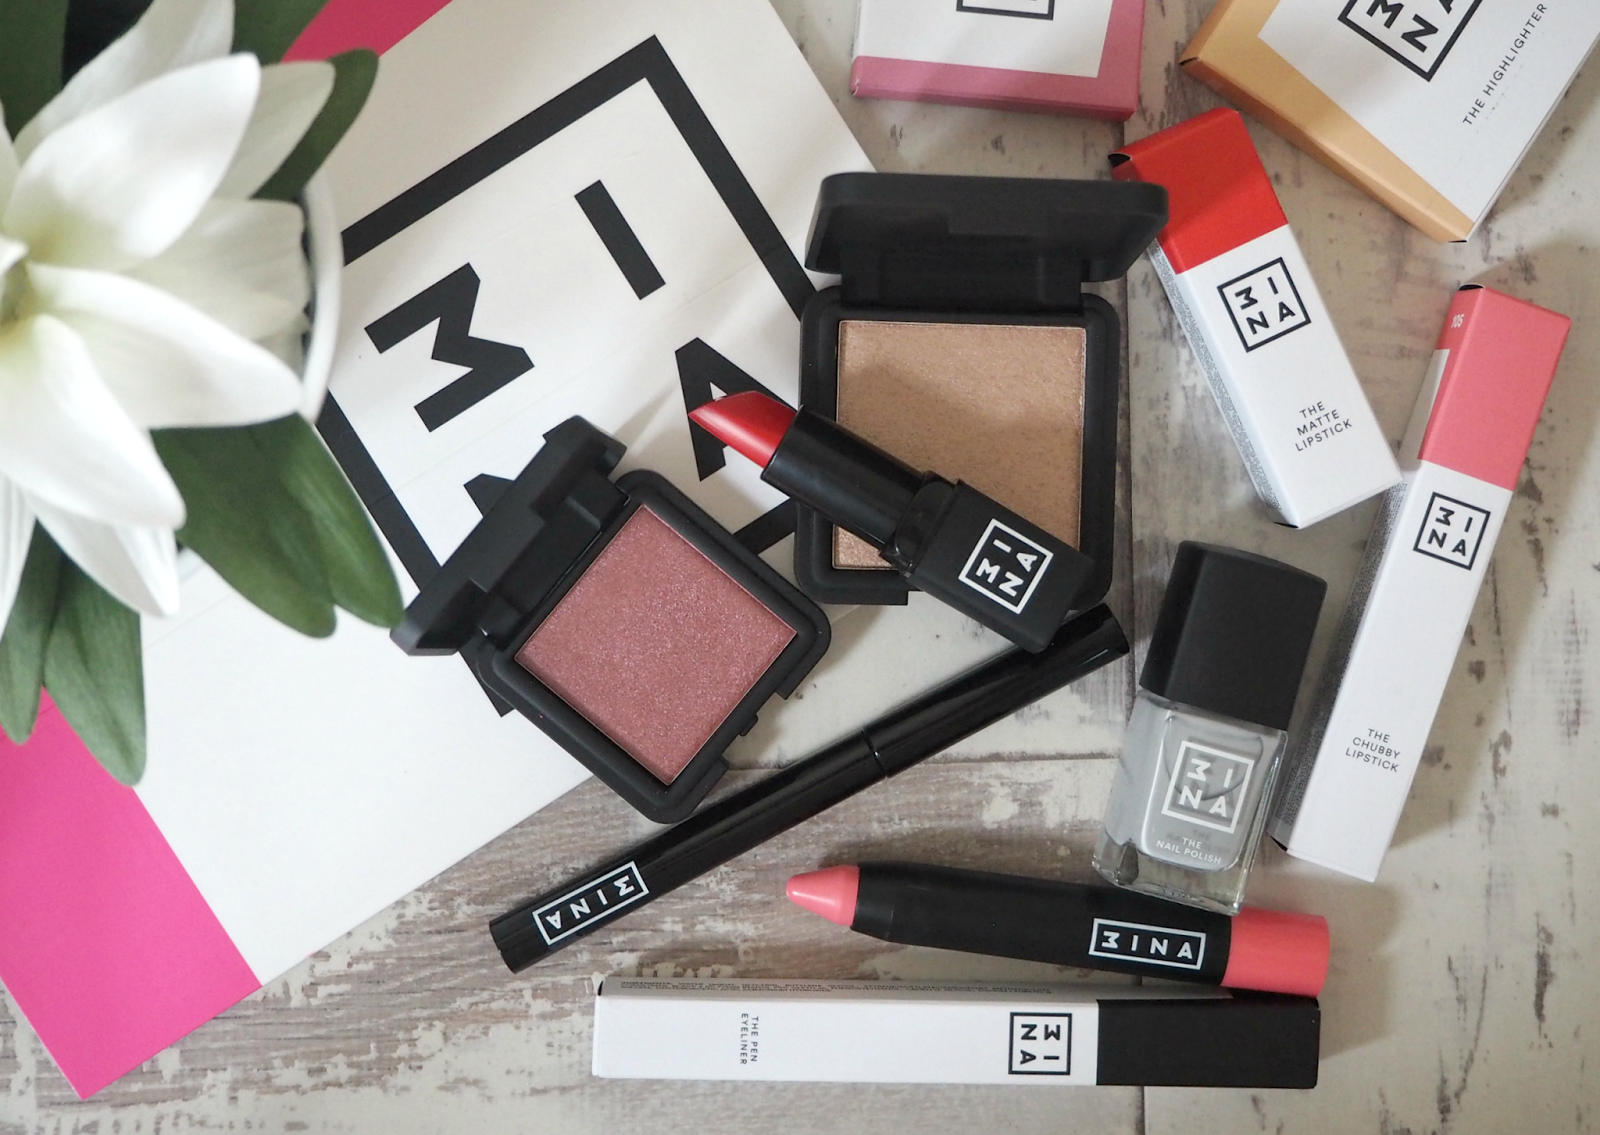 The Hot New Makeup Brand From Spain You'll Want To Spend All Your Money On: MINA (3INA)